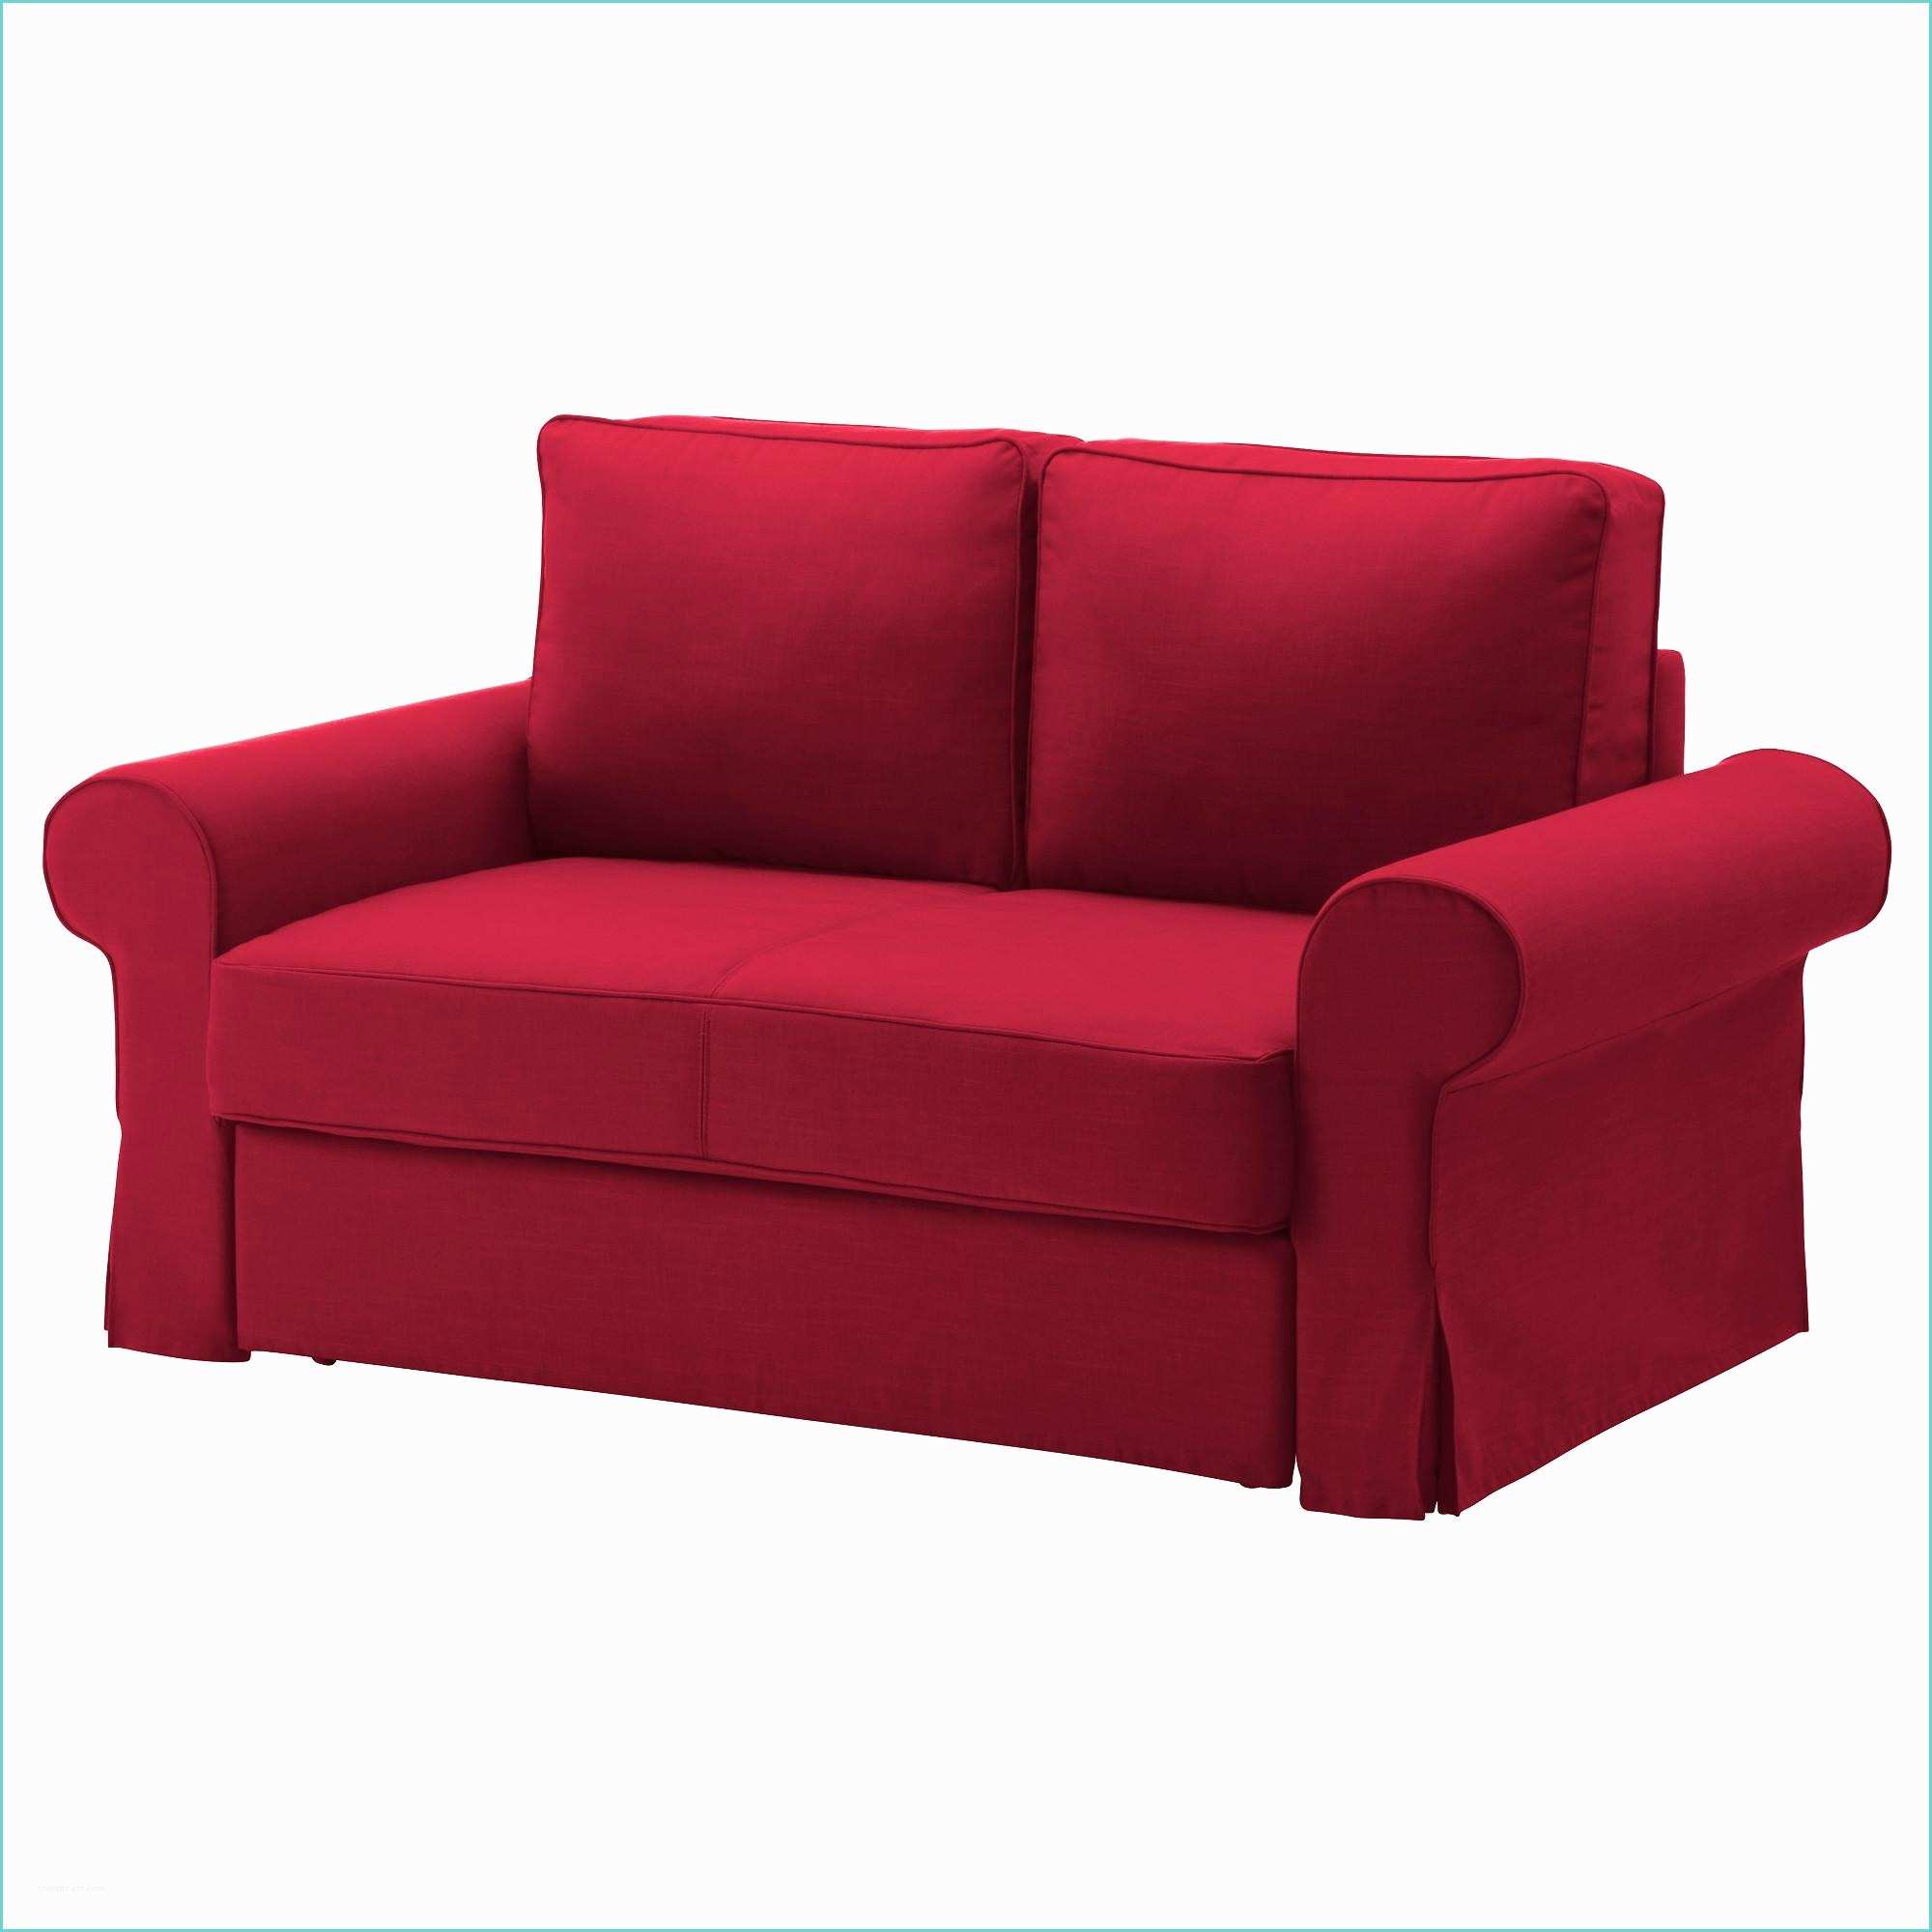 Sofa Beds In Ikea 20 Choices Of Red sofa Beds Ikea